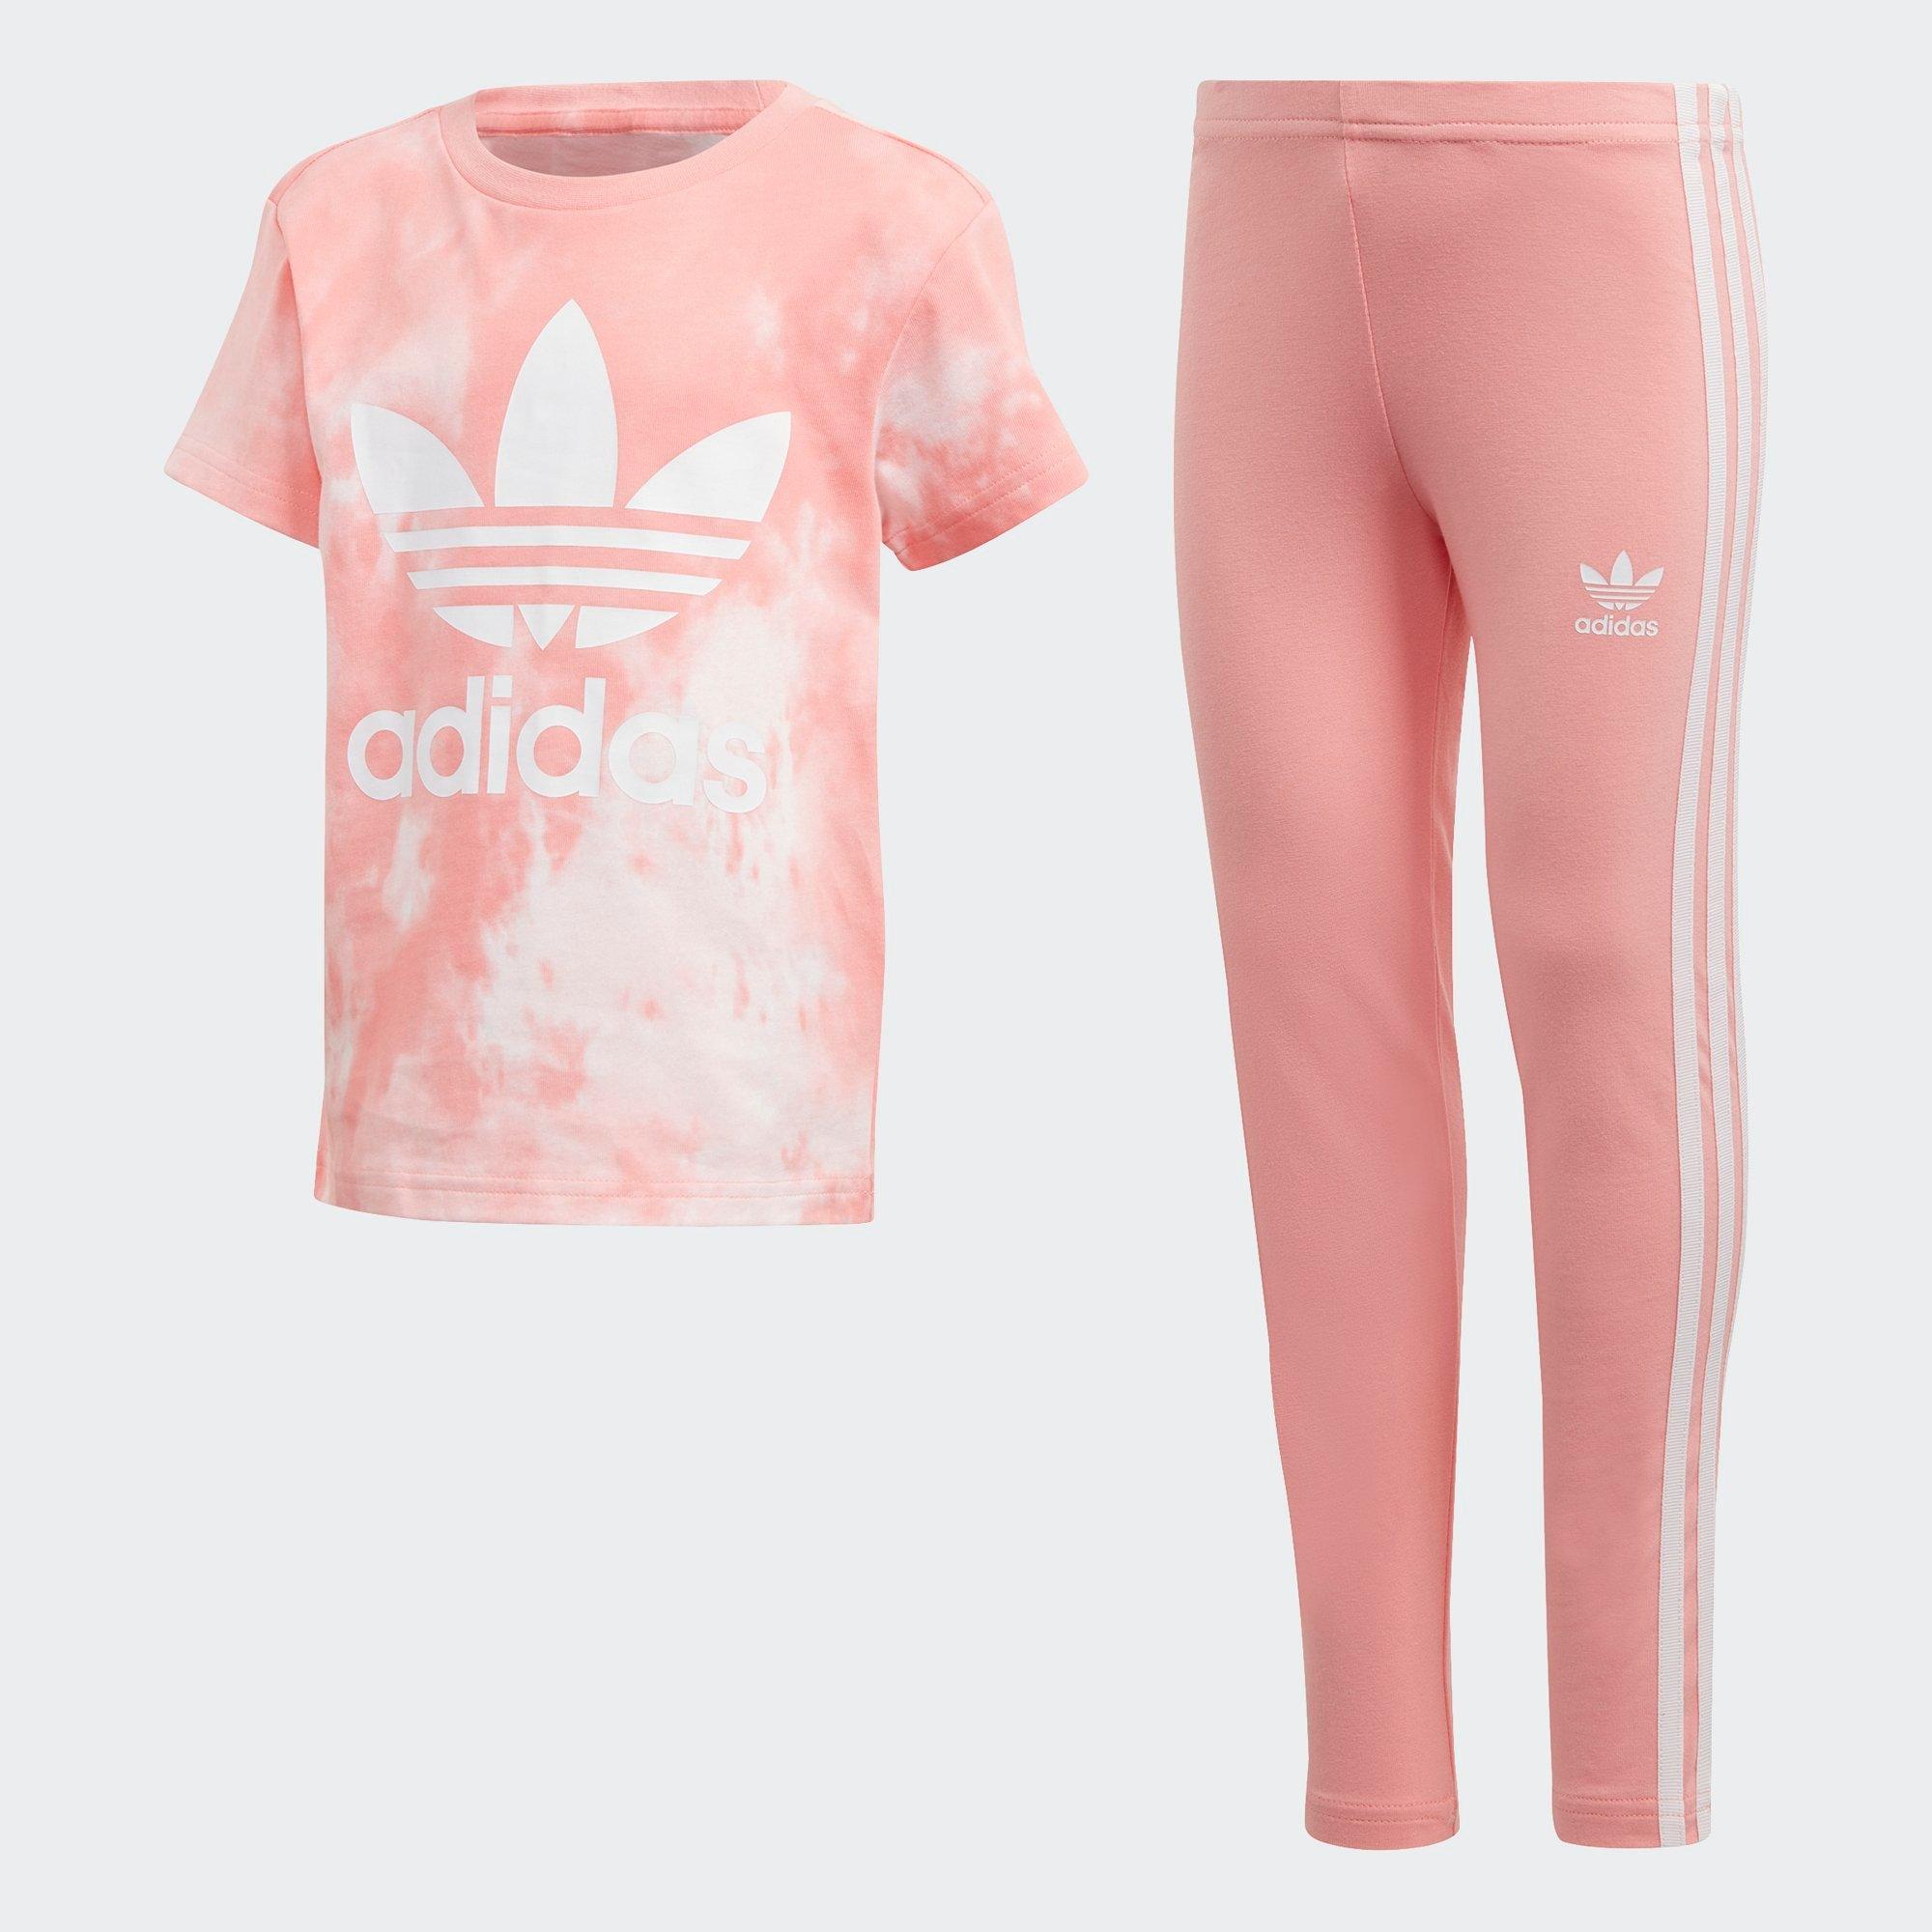 adidas outfits for girls